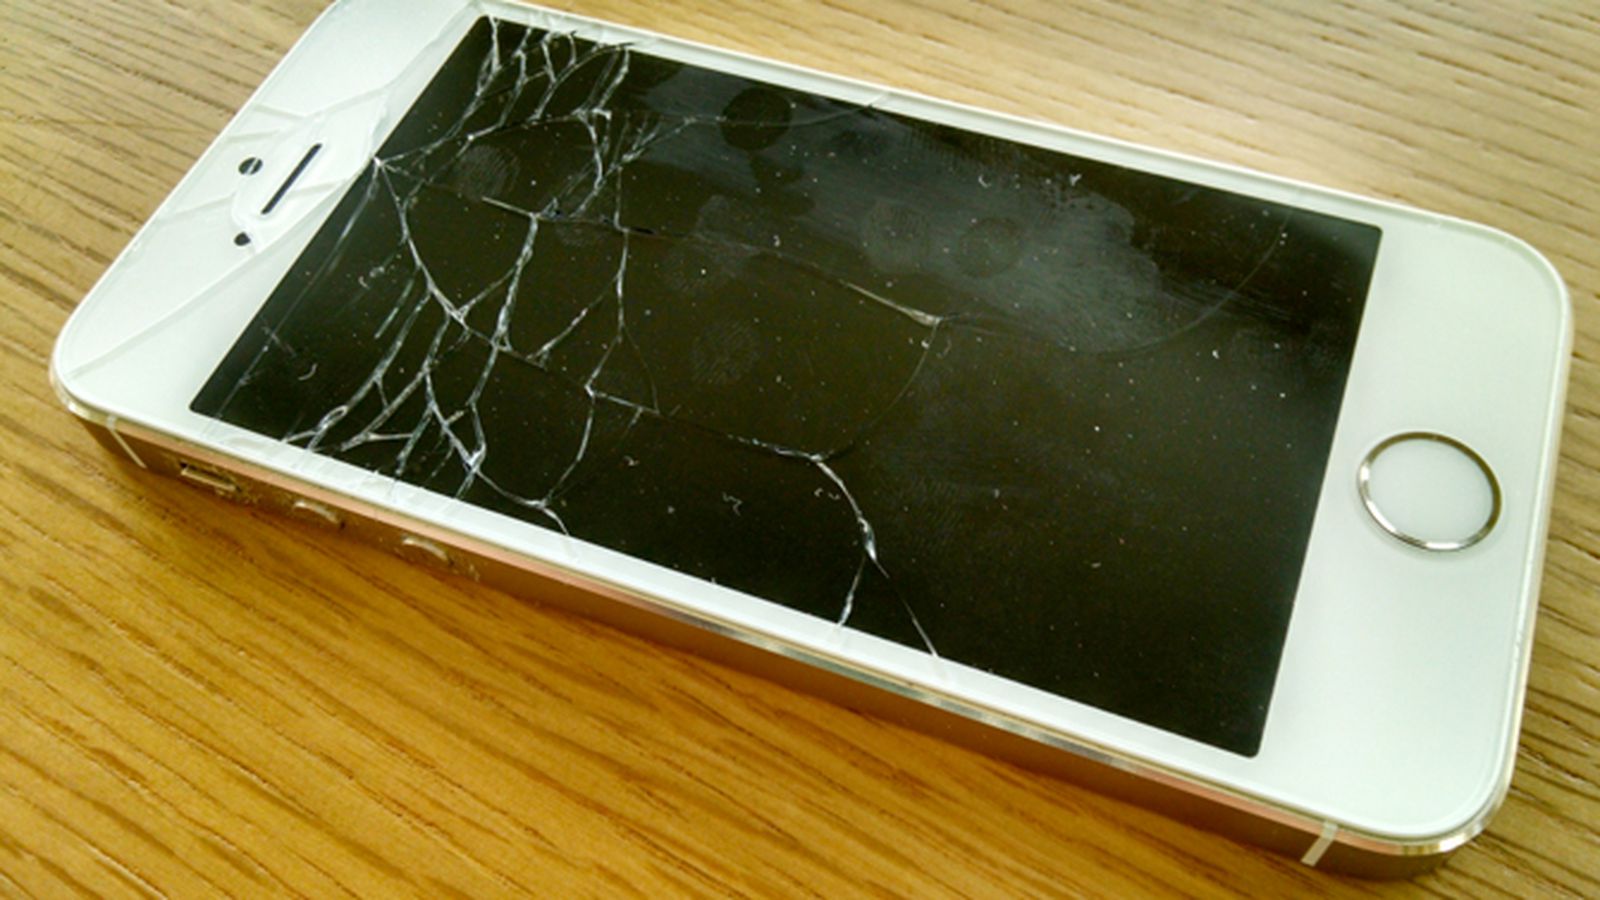 When Should I Sell My Broken iPhone 6?